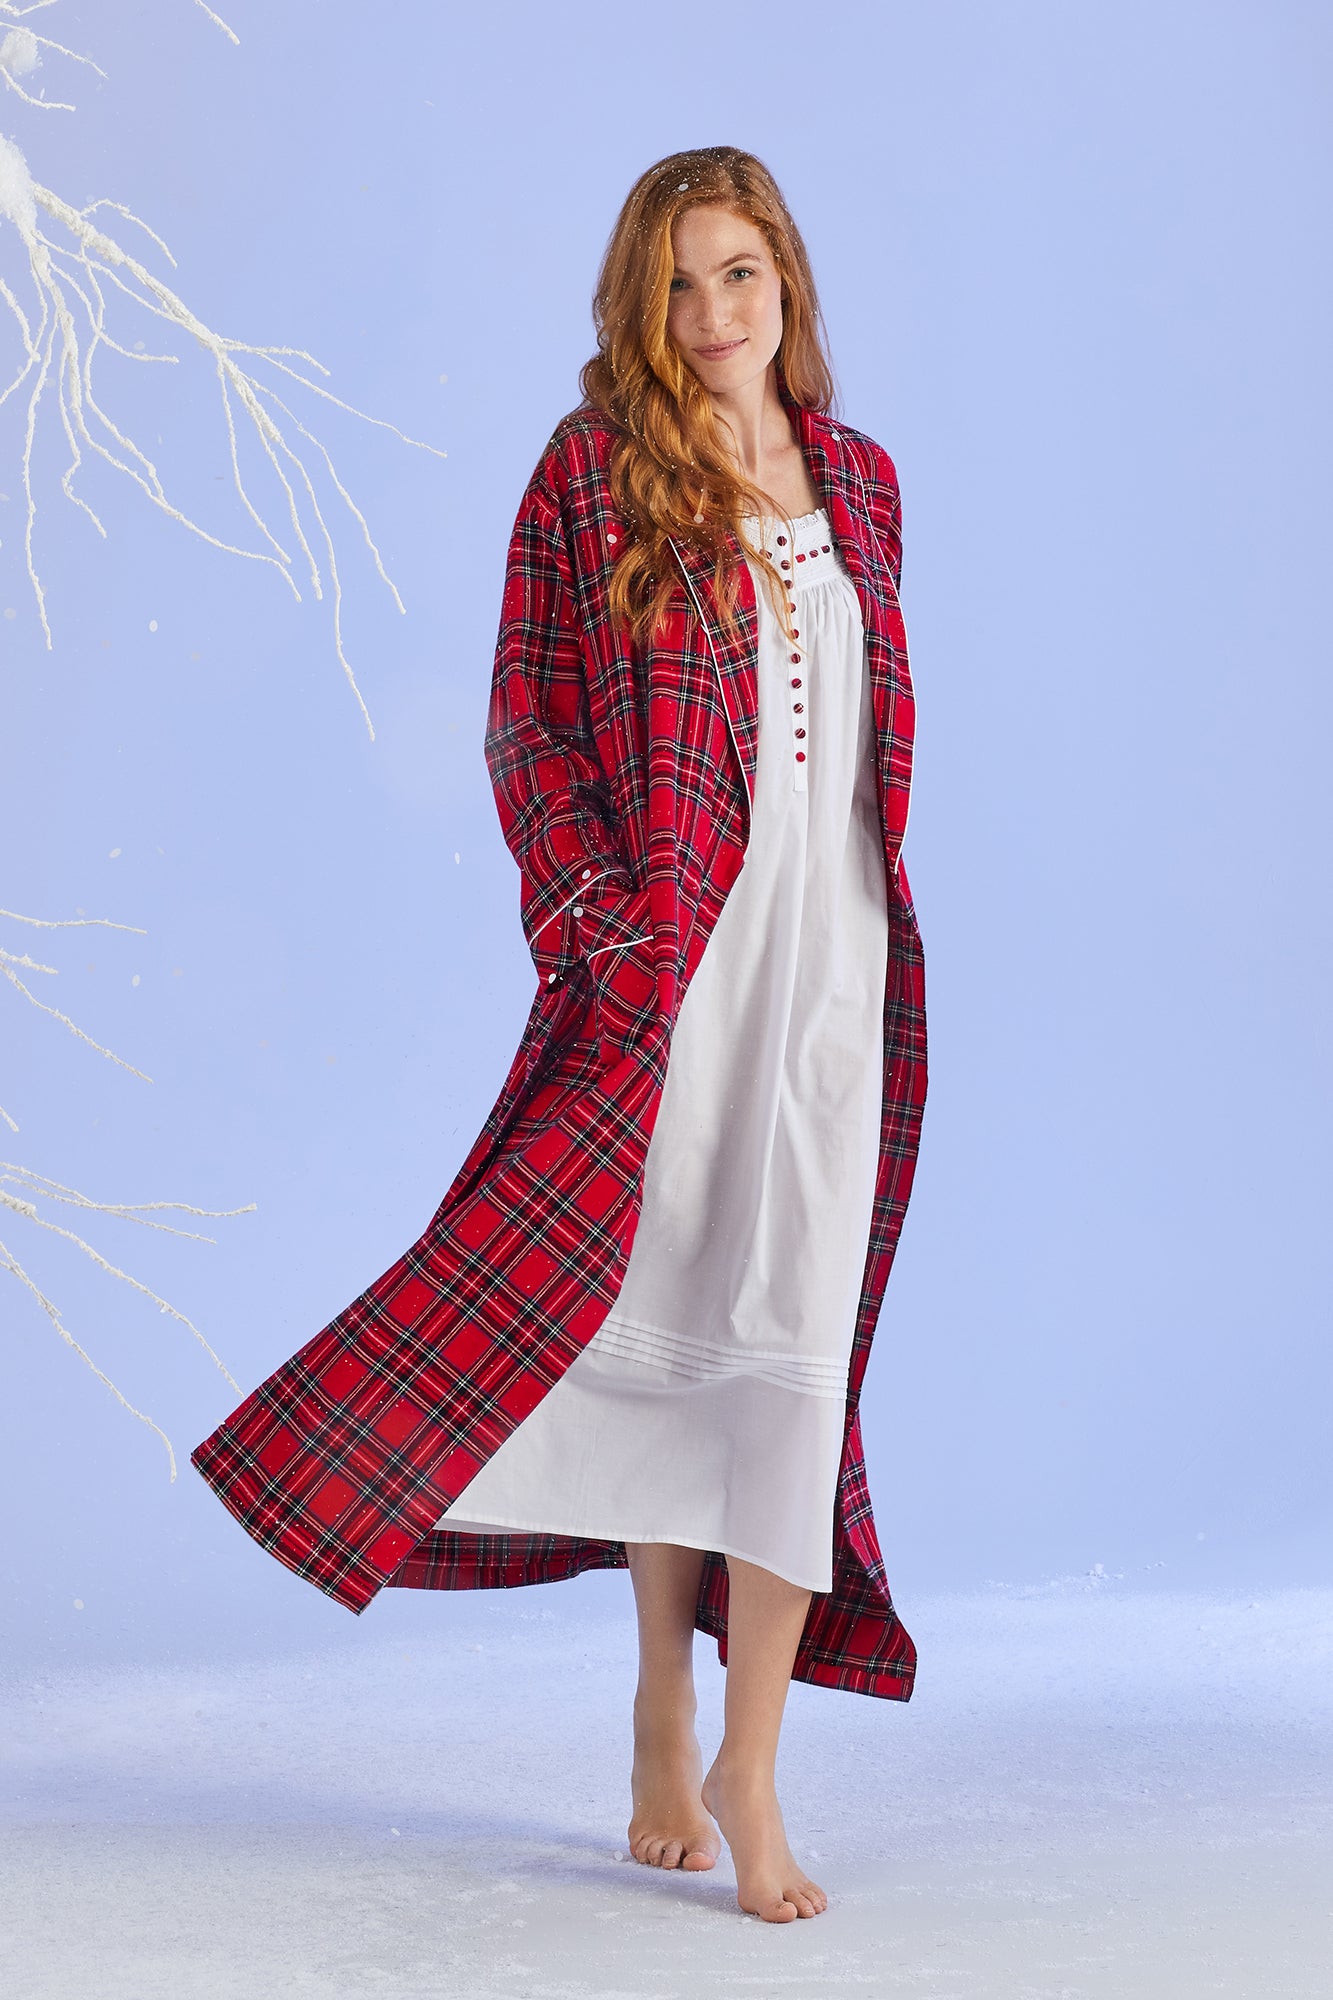 A lady wearing a white sleeveless cotton and red tartan nightgown.